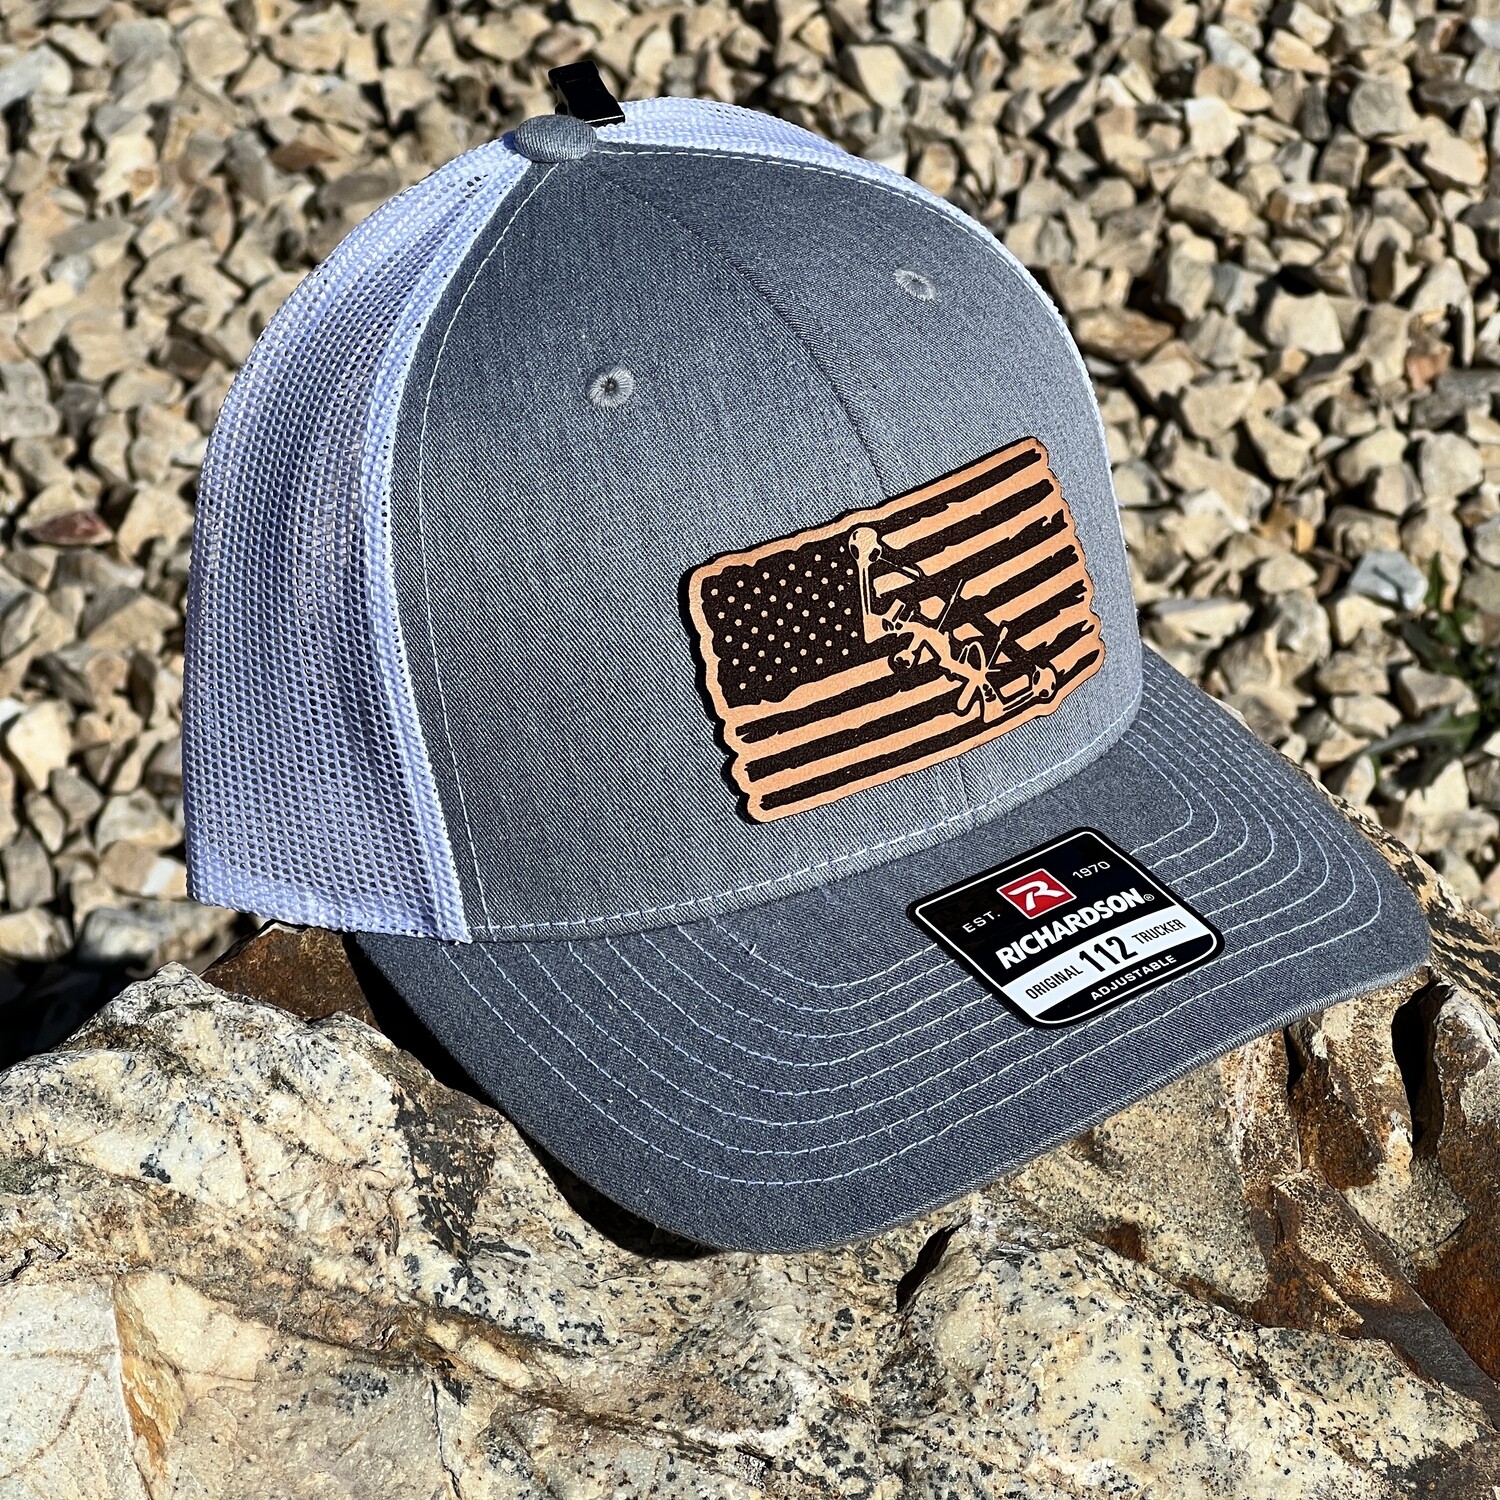 Richardson SnapBack Blue Hat Real Tree Hat with Black Zia Fishhook Leather Patch 